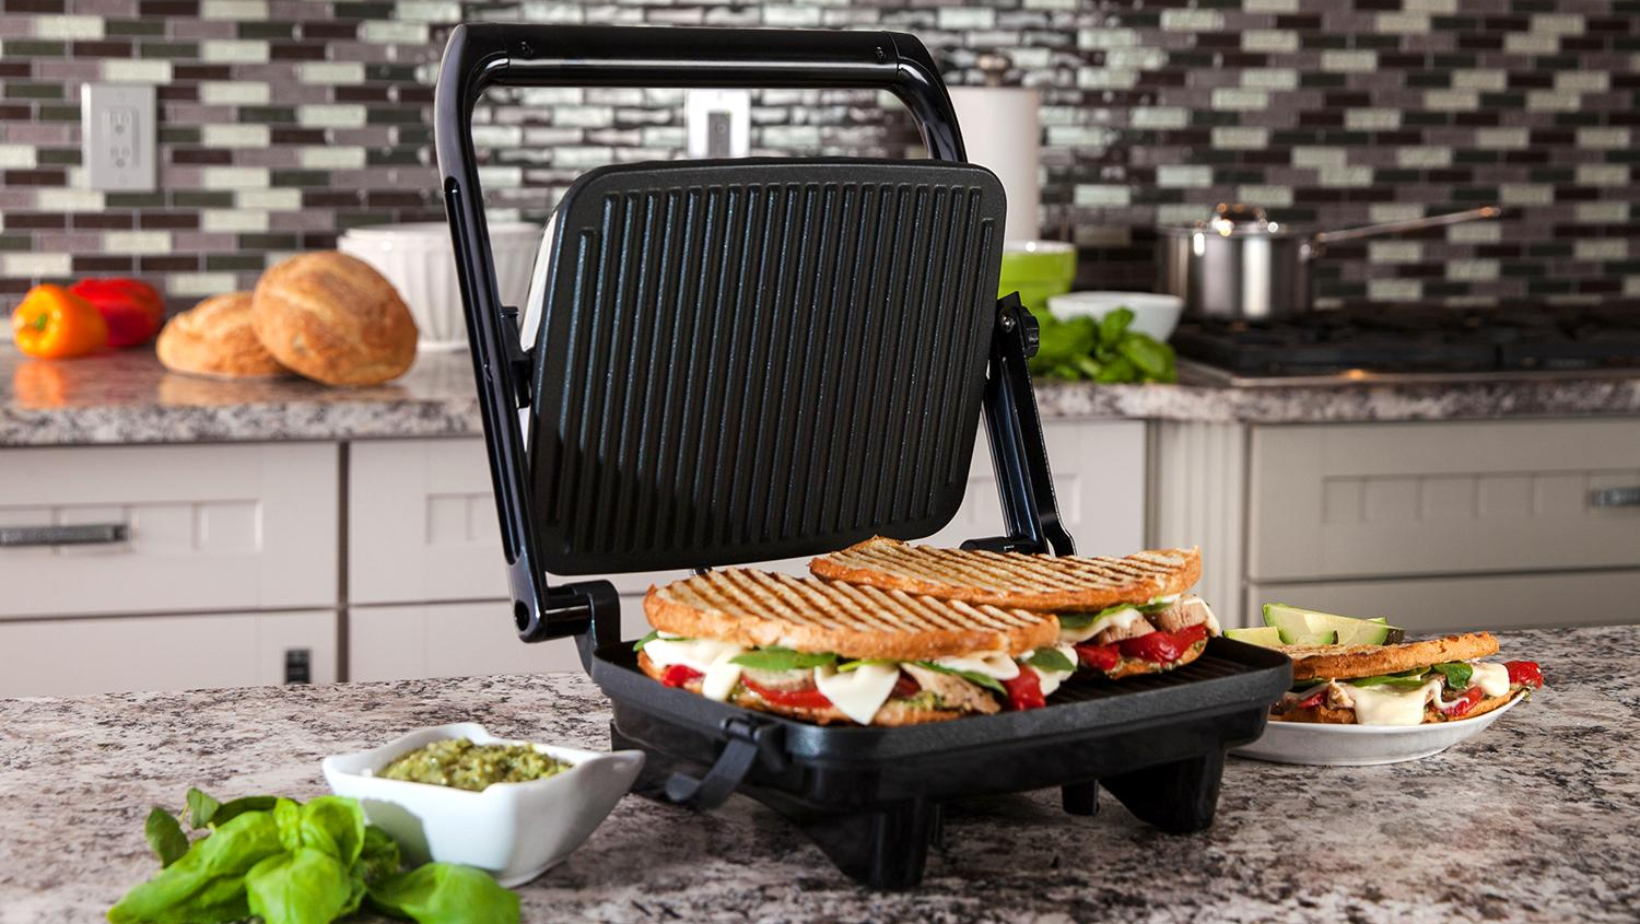 How Do You Clean A Panini Press?